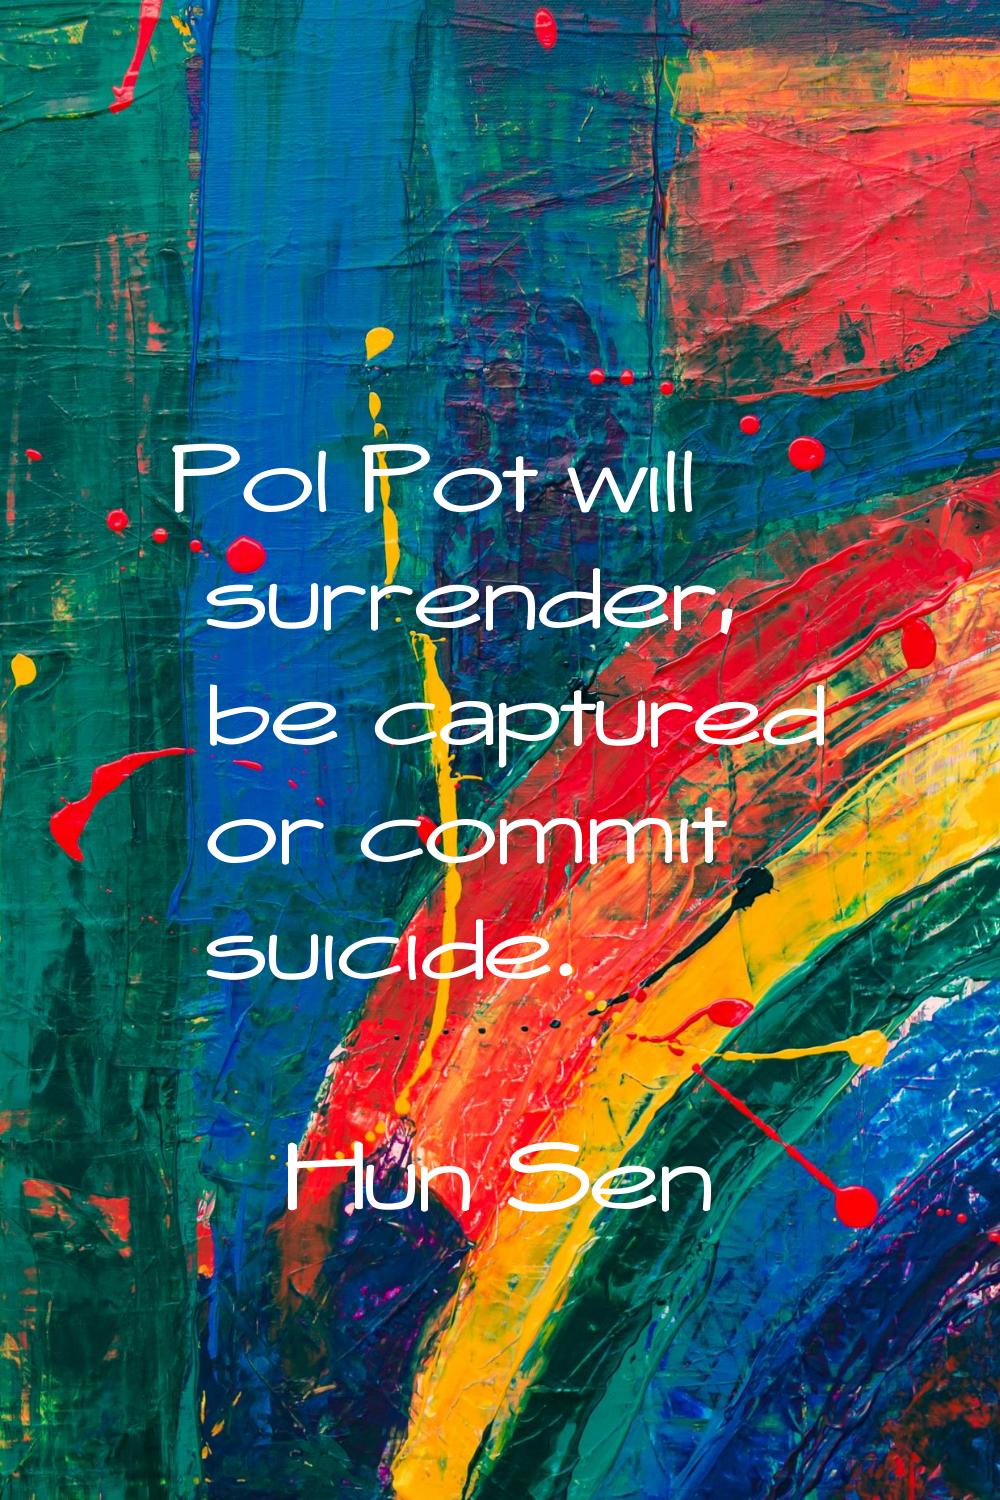 Pol Pot will surrender, be captured or commit suicide.